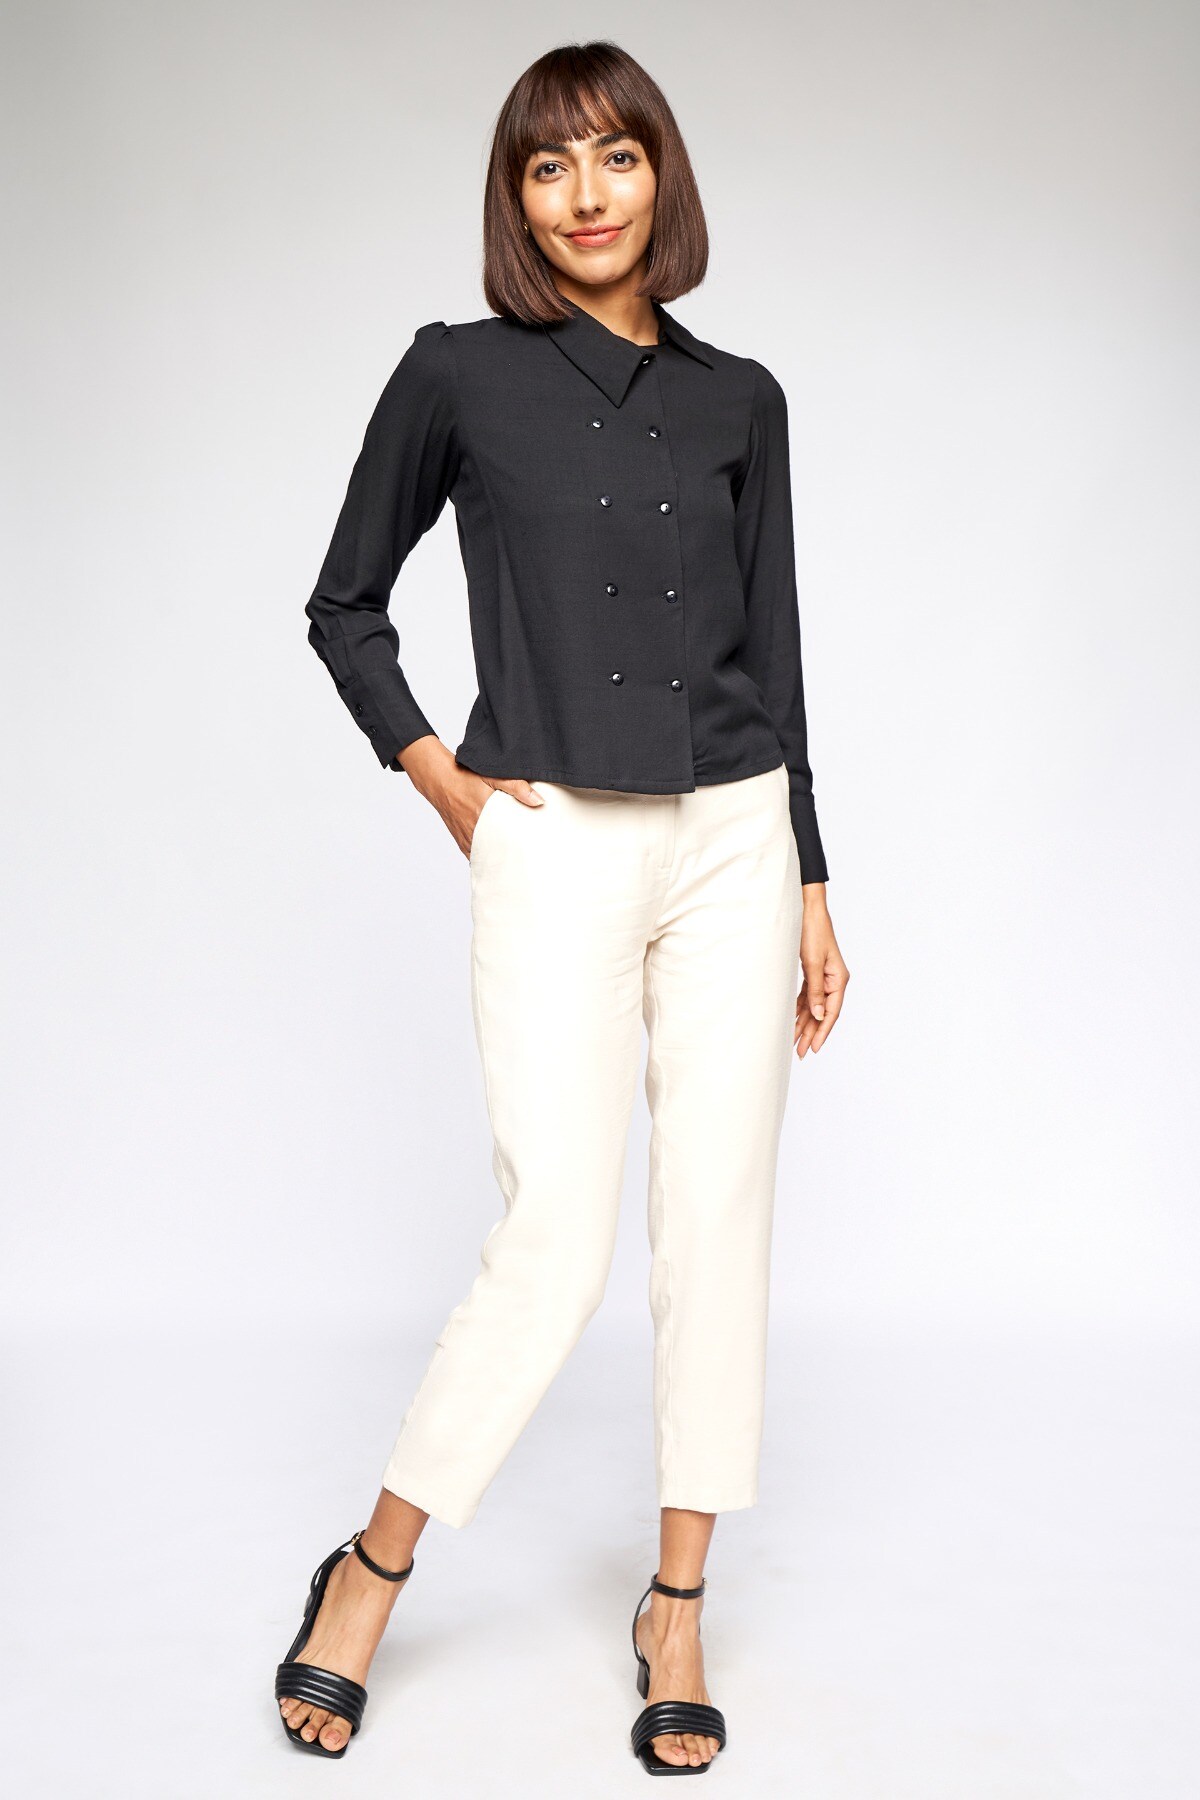 2 - Black Solid Shirt Style Top, image 2